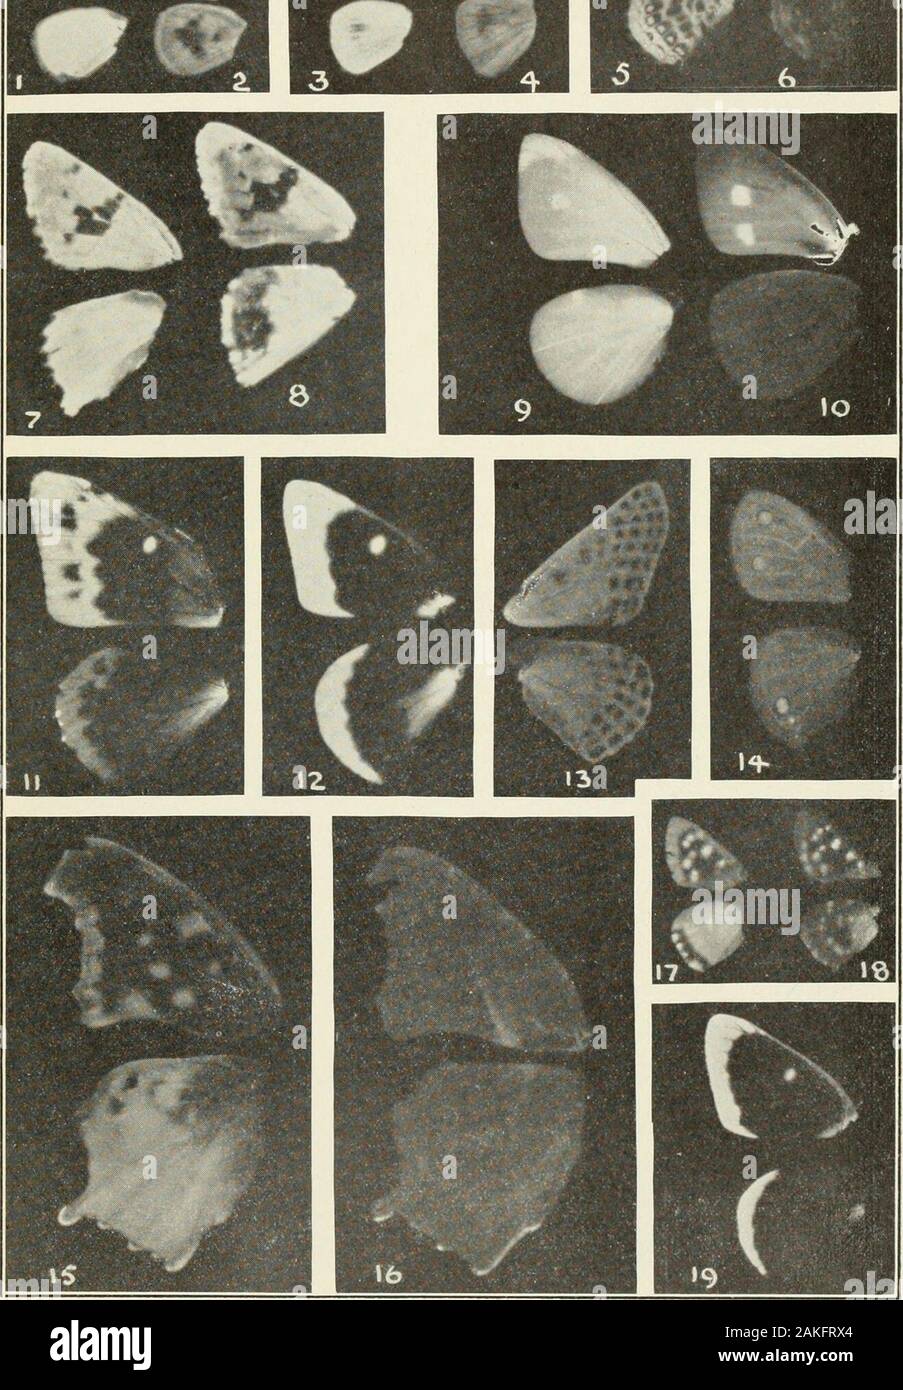 Bulletin - United States National Museum . side (compare pi. 2S, fig. 2). 10. Pieris rapae, right wings of the same specimen, underside. 11. Colias eurj/flicmc, female, fresh specimen, upper side (compare pi. 26, fig. 7). 12. Colias em-ijtheme, male, fresh specimen, upper side. 13. Euphydryas phaiiton, male, upper side (compare pi. 11, lig. 7) : third exposure on a specimen caught one month previously. 14. Neonympha eurytus, male, upper side (compare pi. 2, fig. 1) ; third exposure on a specimen caught one month previously. 15. Polygonia interrogationis, female, fresh specimen, upper side (com Stock Photo